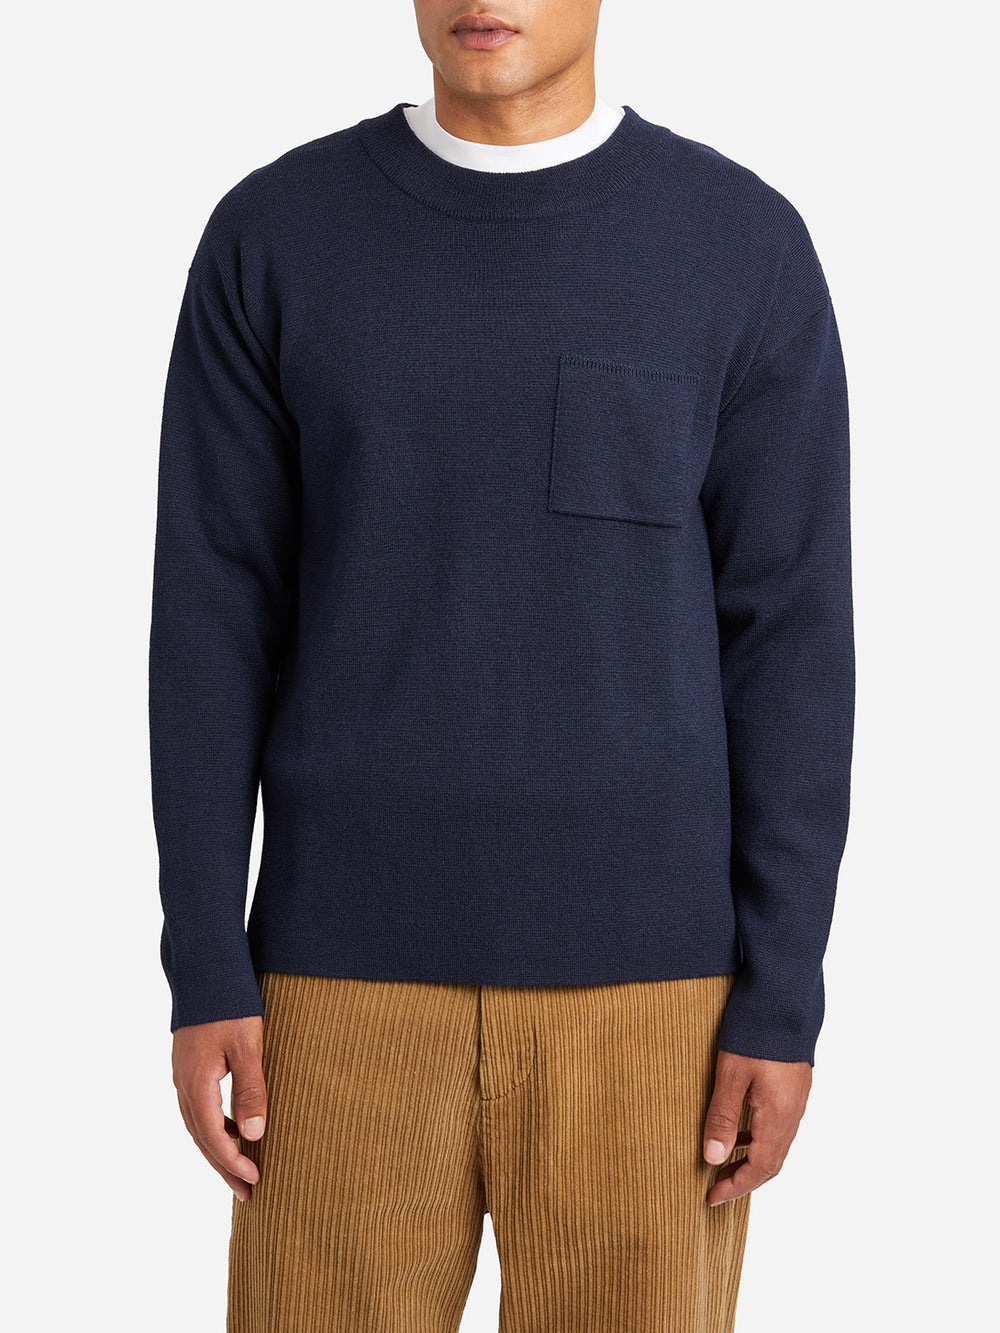 NAVY sweaters for men vincent pocket sweater ons clothing